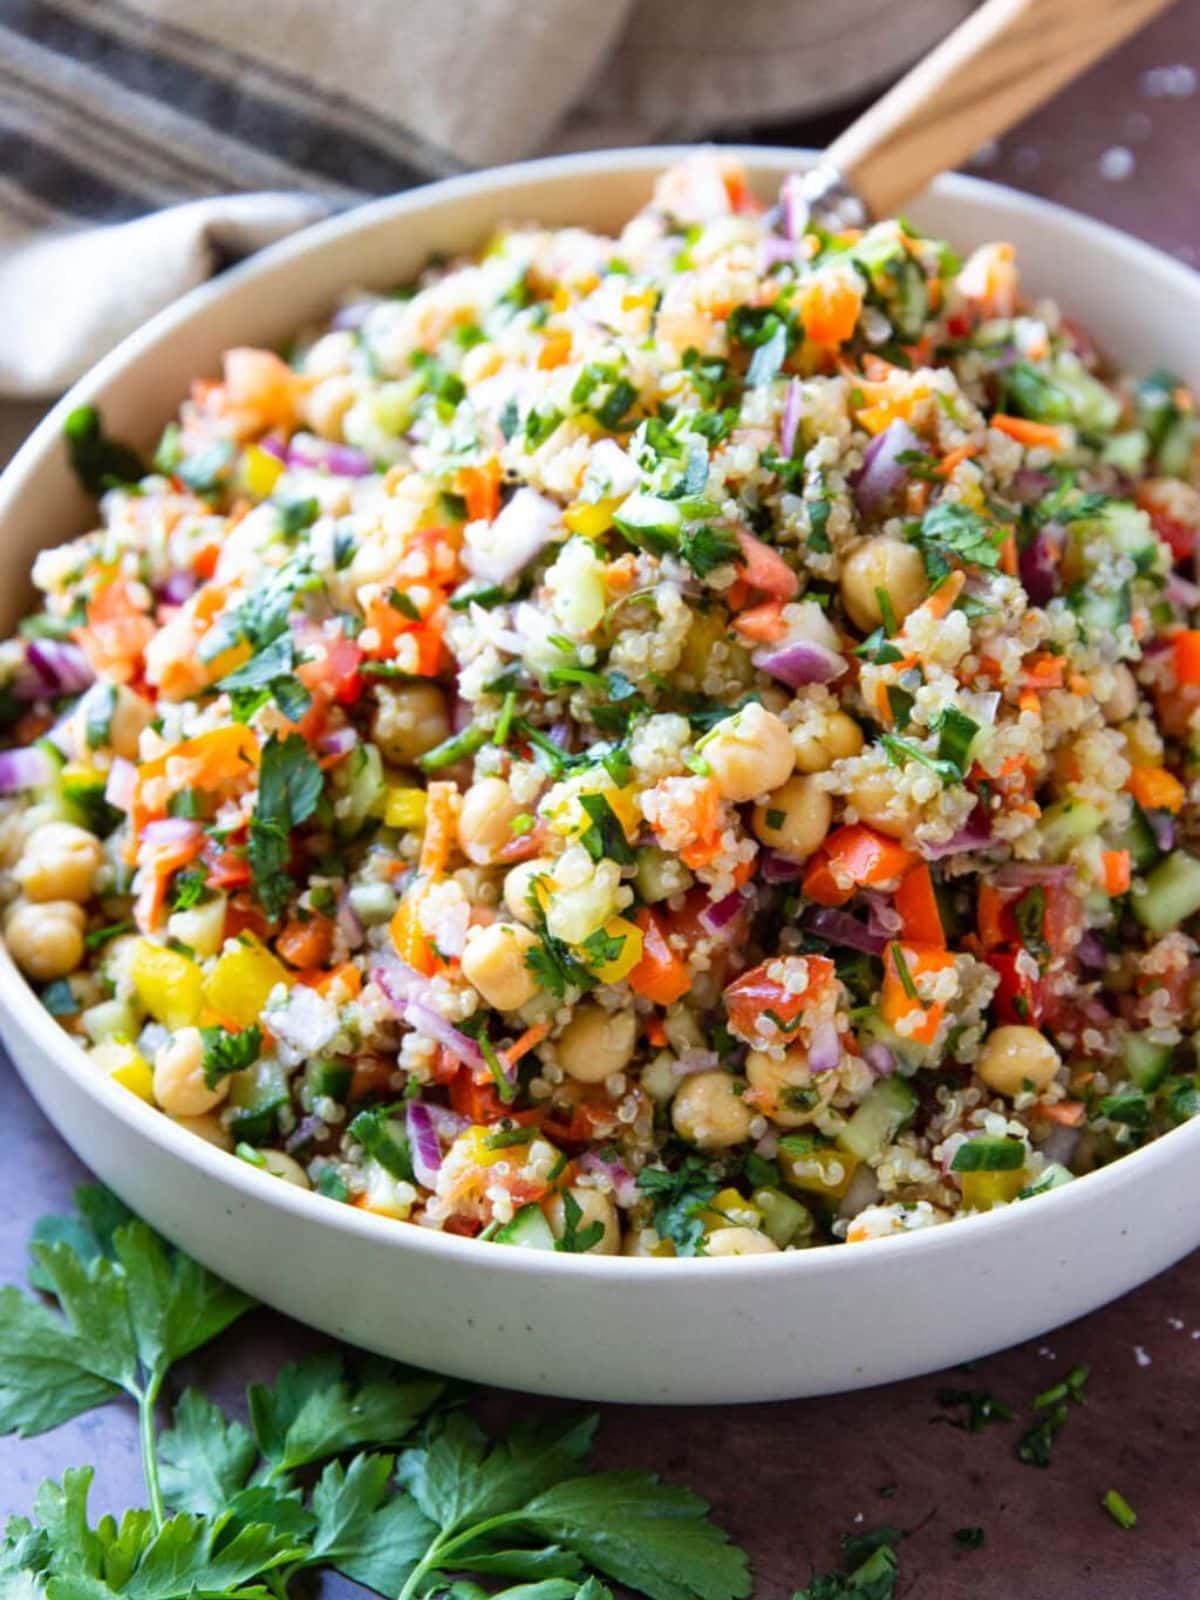 Quinoa chickpea salad in a white salad bowl with a wooden spoon